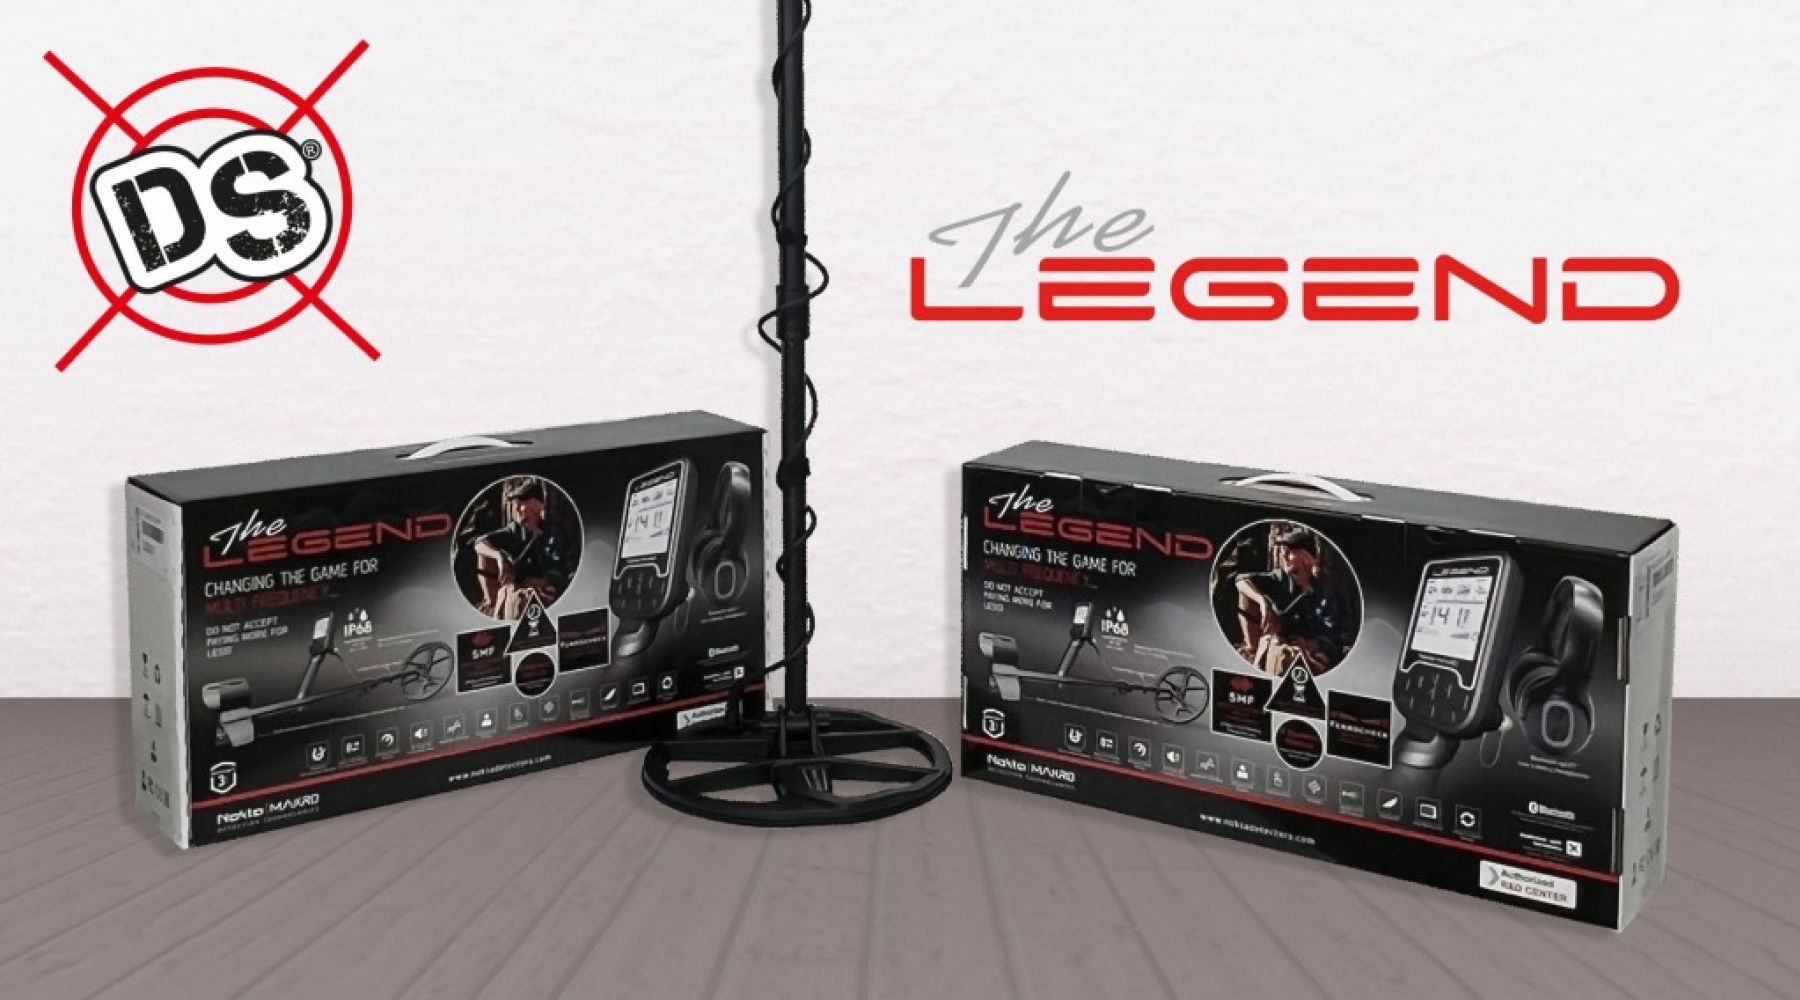 7 Good reasons to choose the brand new The Legend